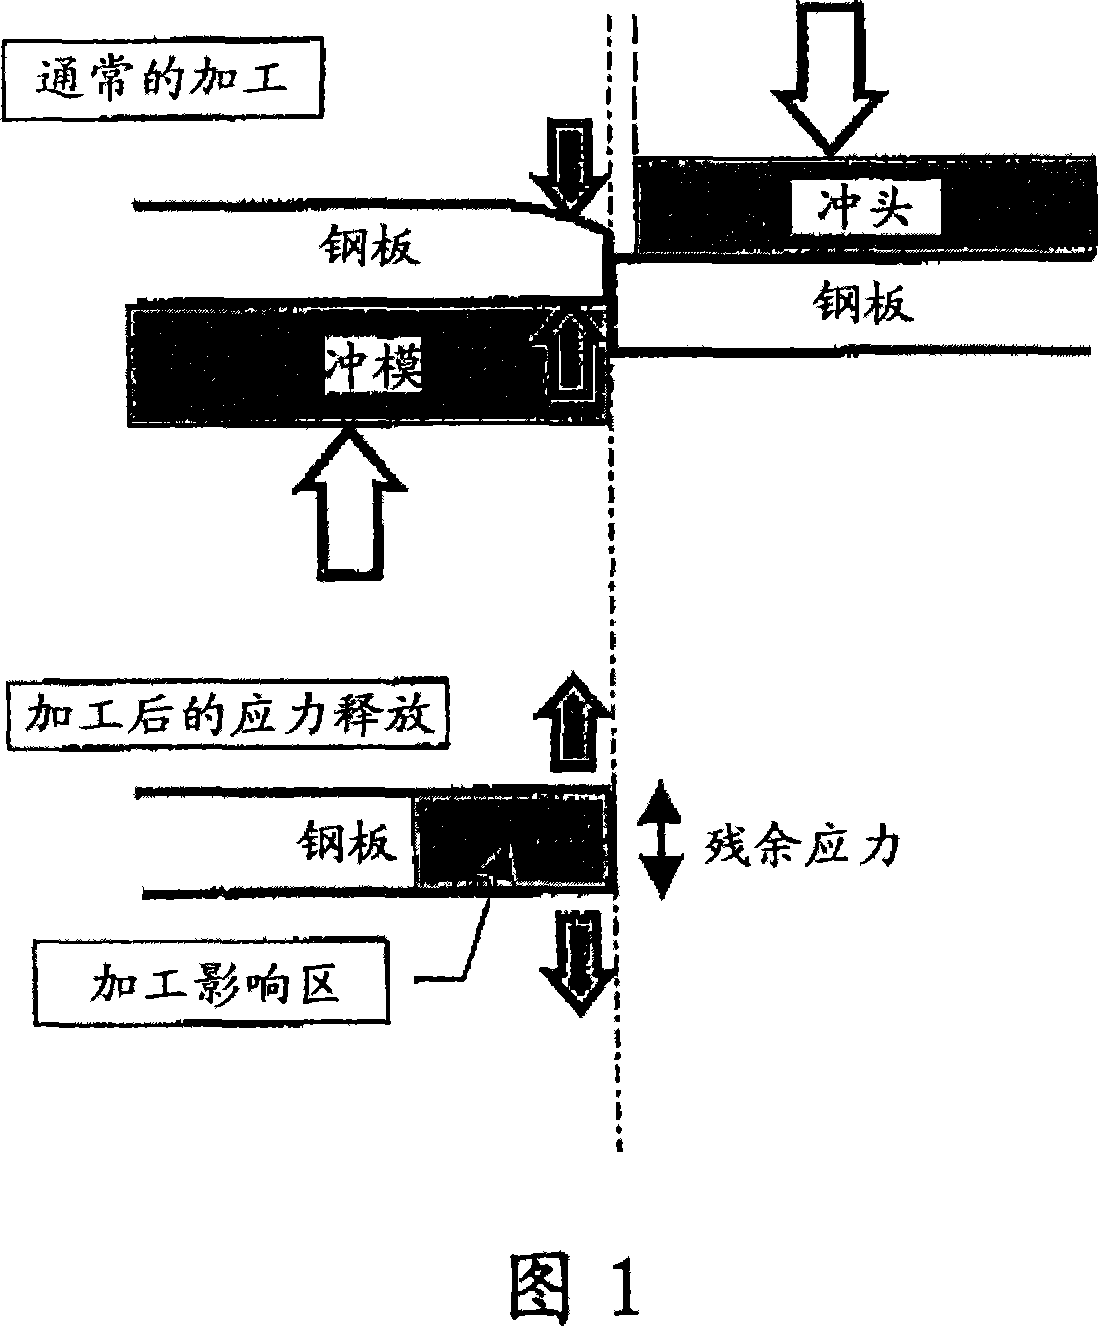 High-strength part and process for producing the same